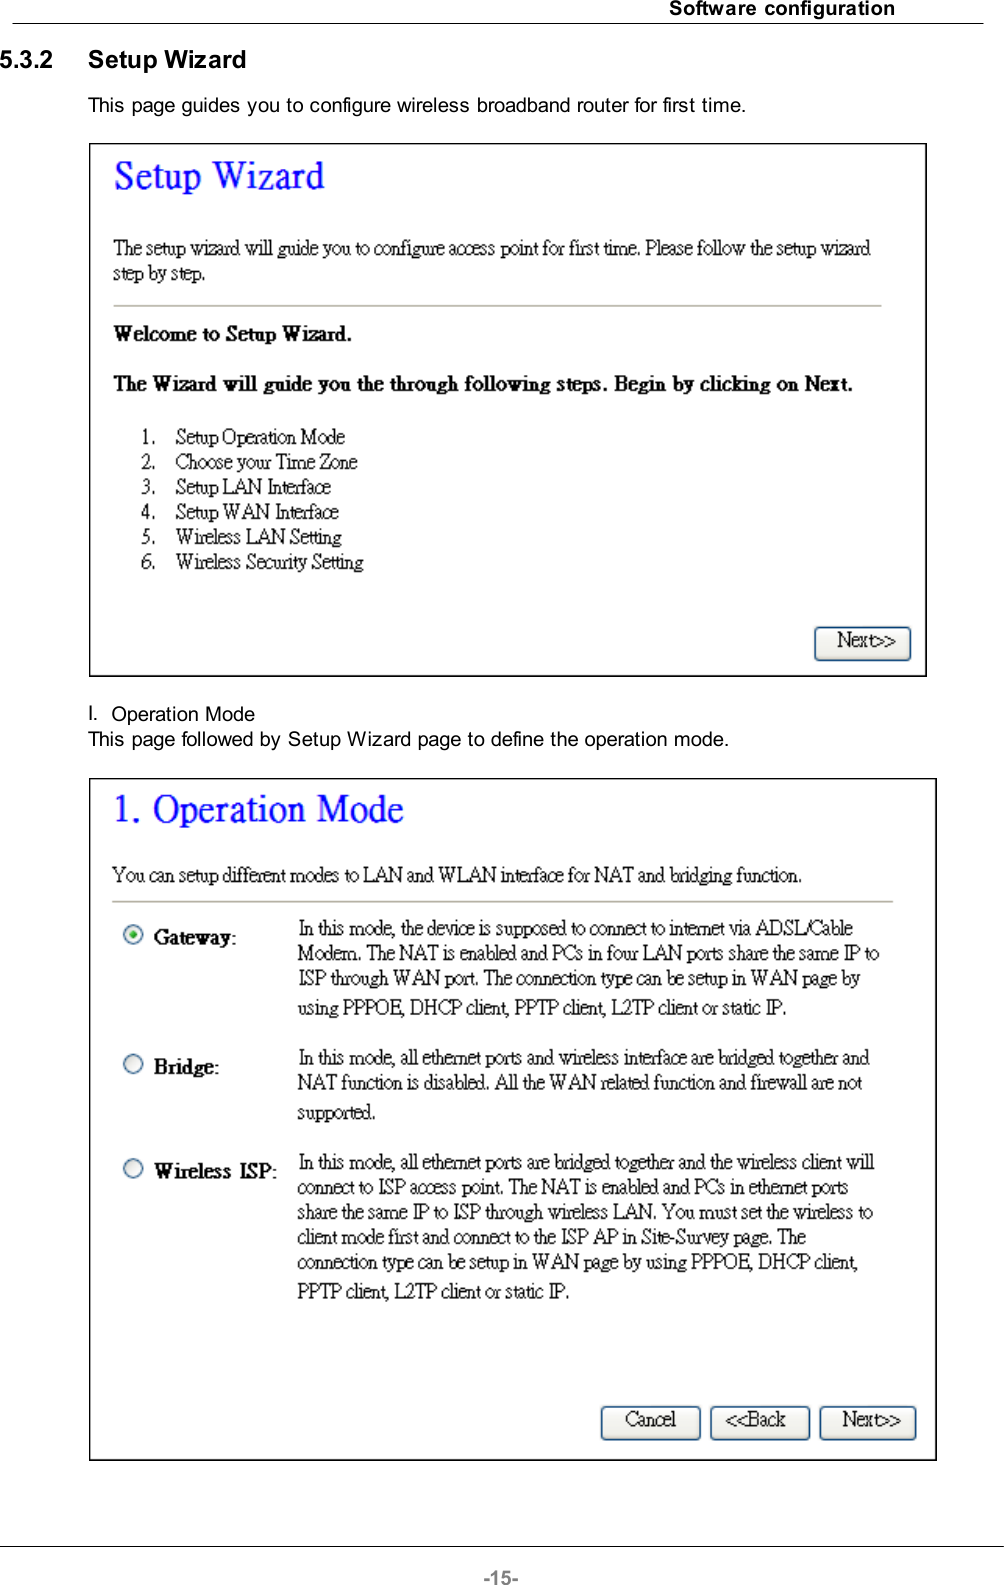 Software configuration-15-5.3.2 Setup WizardThis page guides you to configure wireless broadband router for first time.I. Operation ModeThis page followed by Setup Wizard page to define the operation mode.